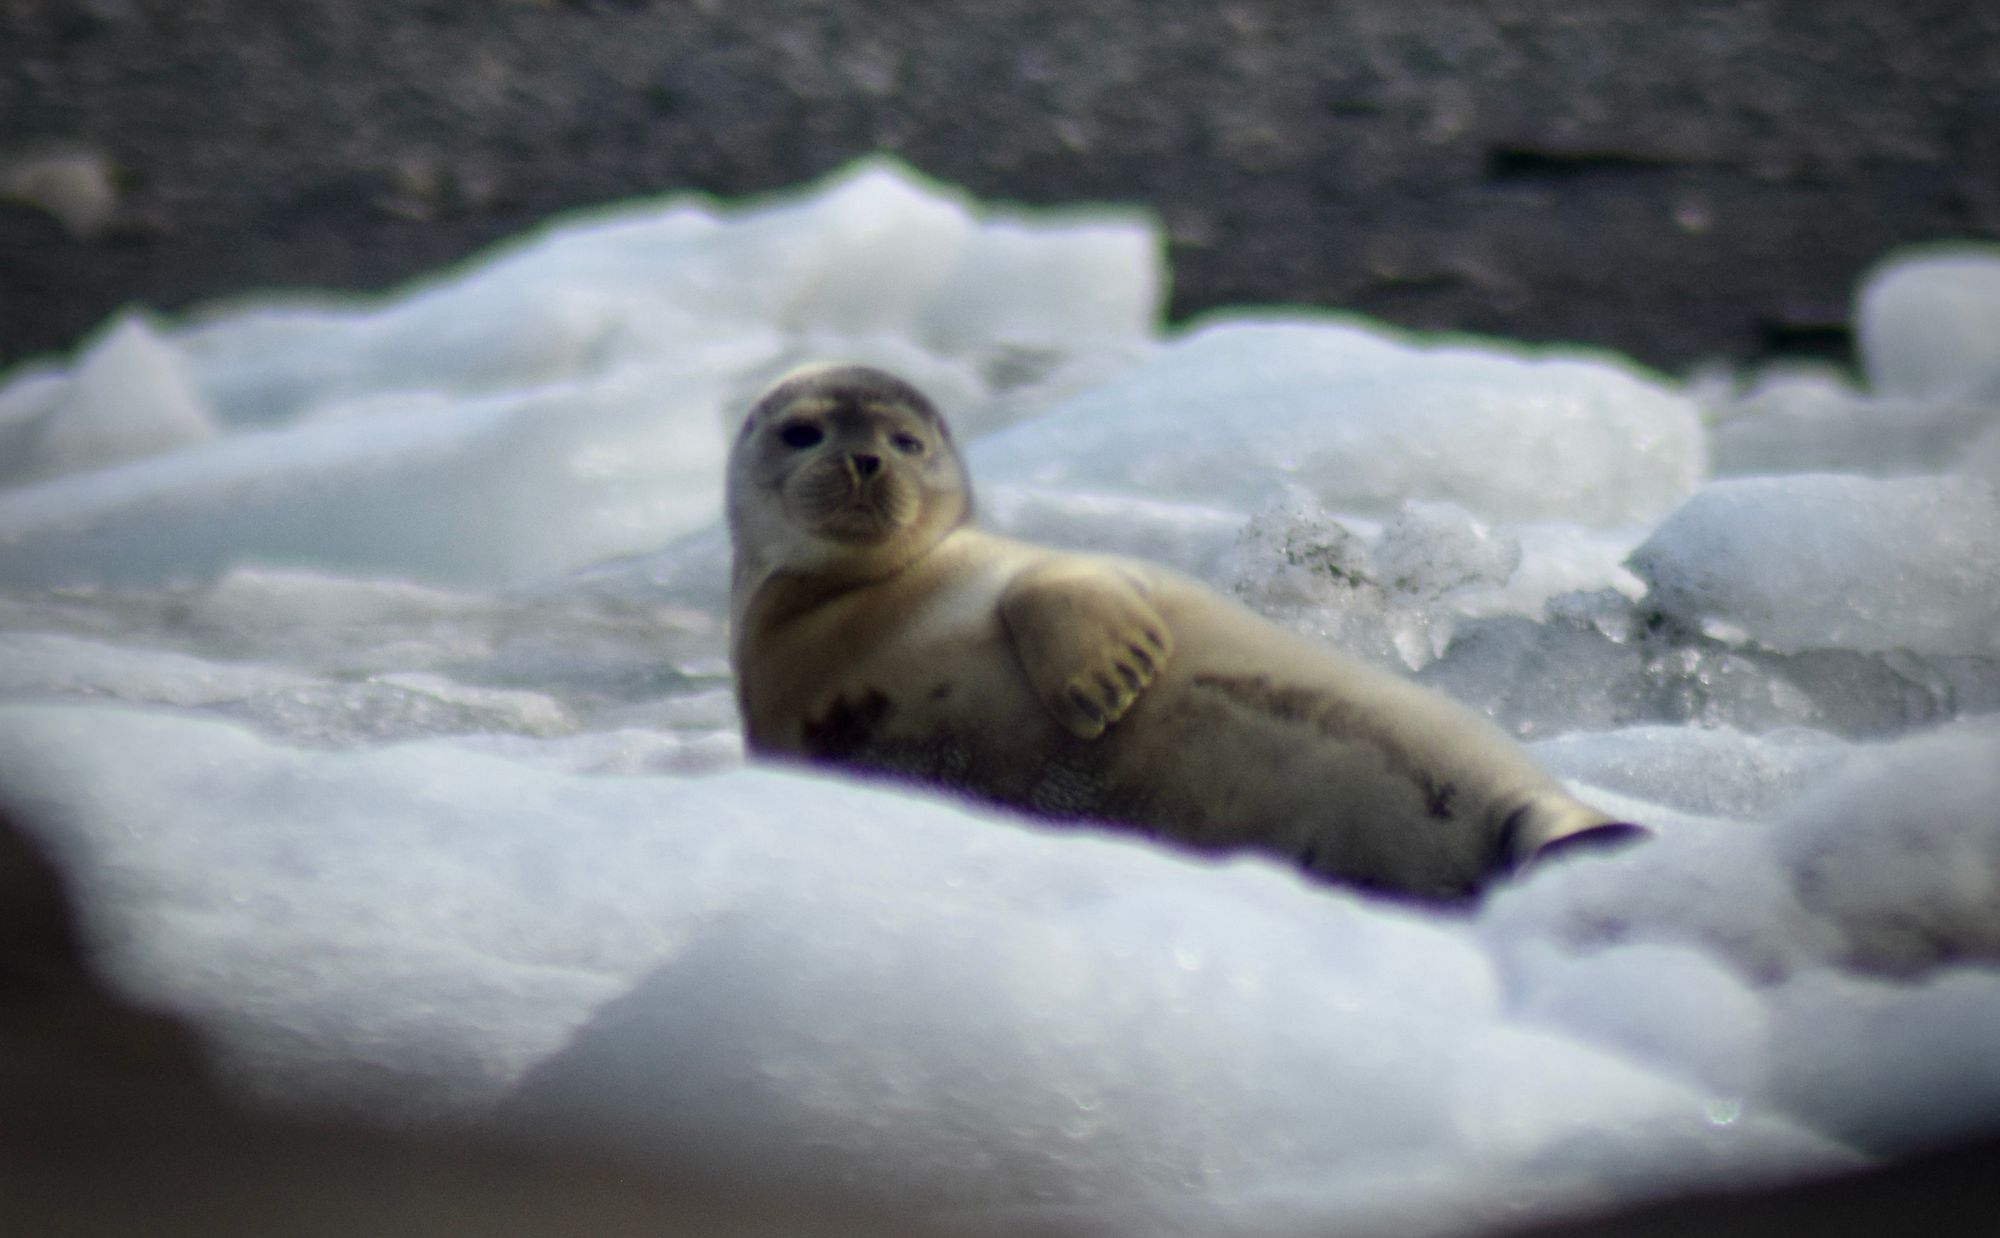 View through binoculars of a baby seal lying on a raft of ice in Svalbard.